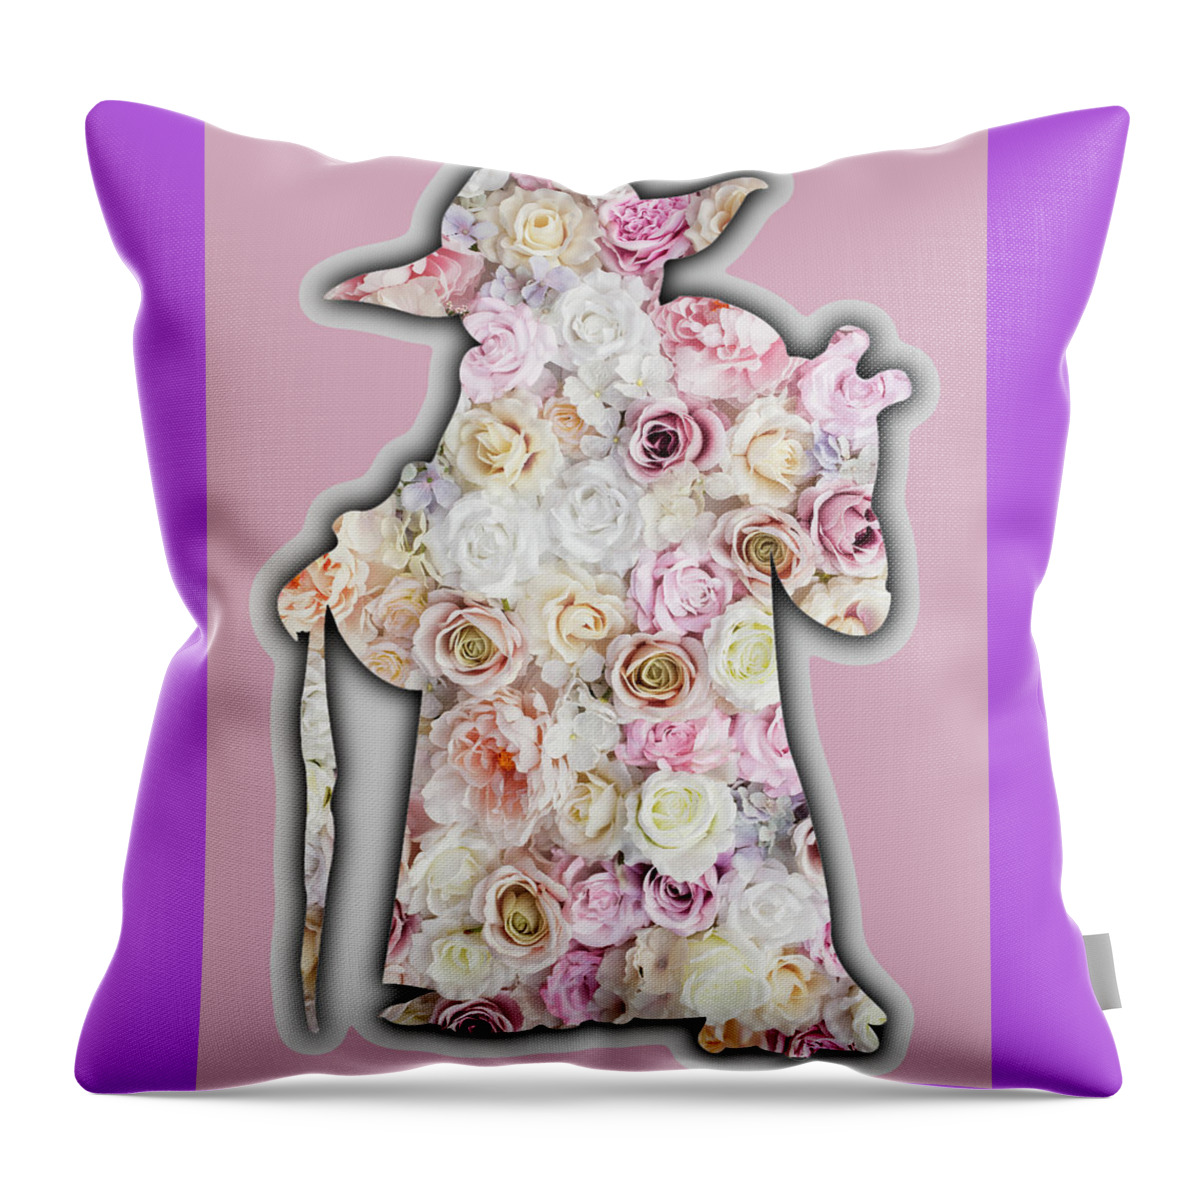 Yoda Throw Pillow featuring the painting Yoda Flower Floral Star Wars by Tony Rubino